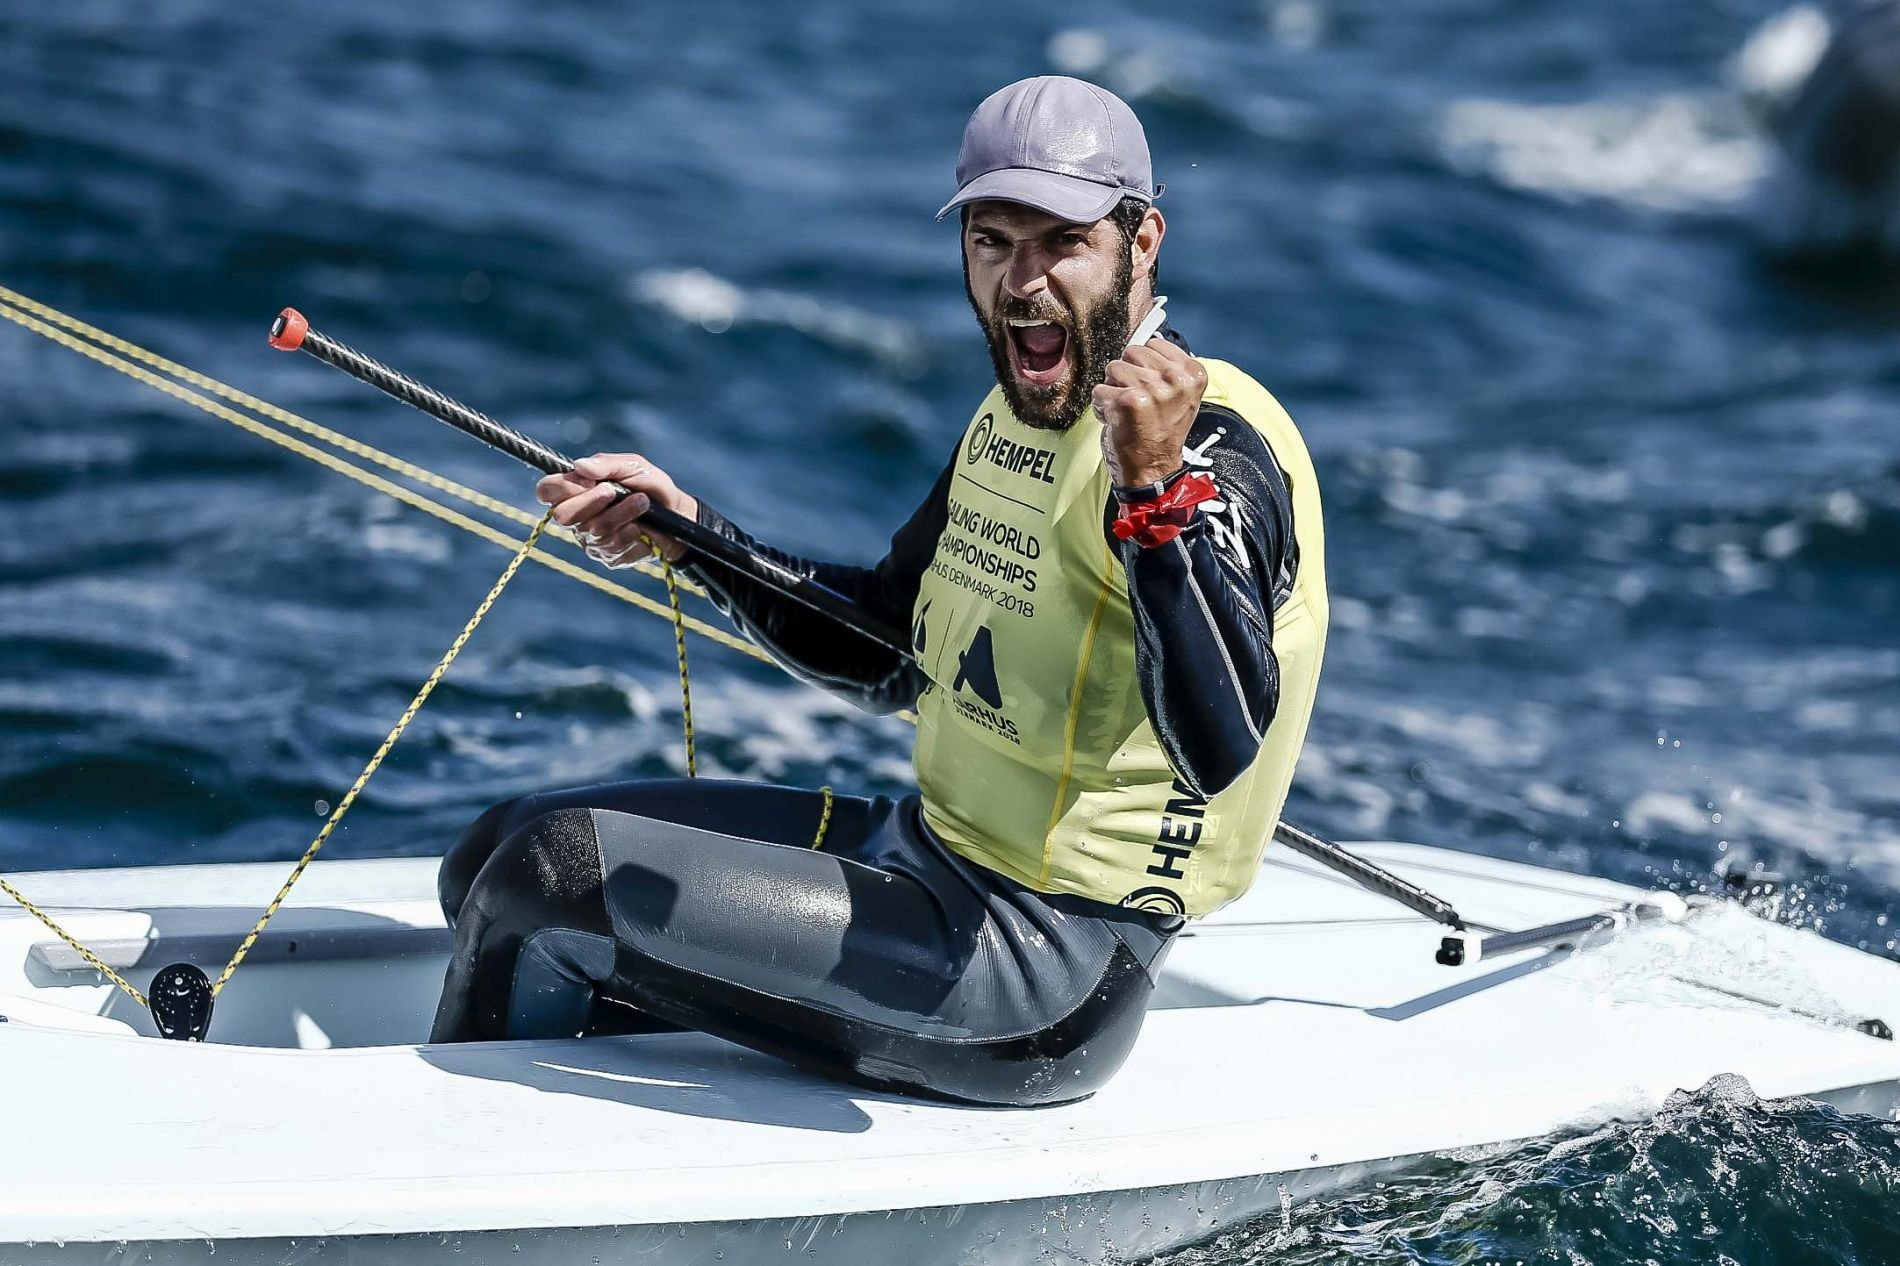 Pavlos Kontides moved up to third in the men's laser rankings ©Getty Images